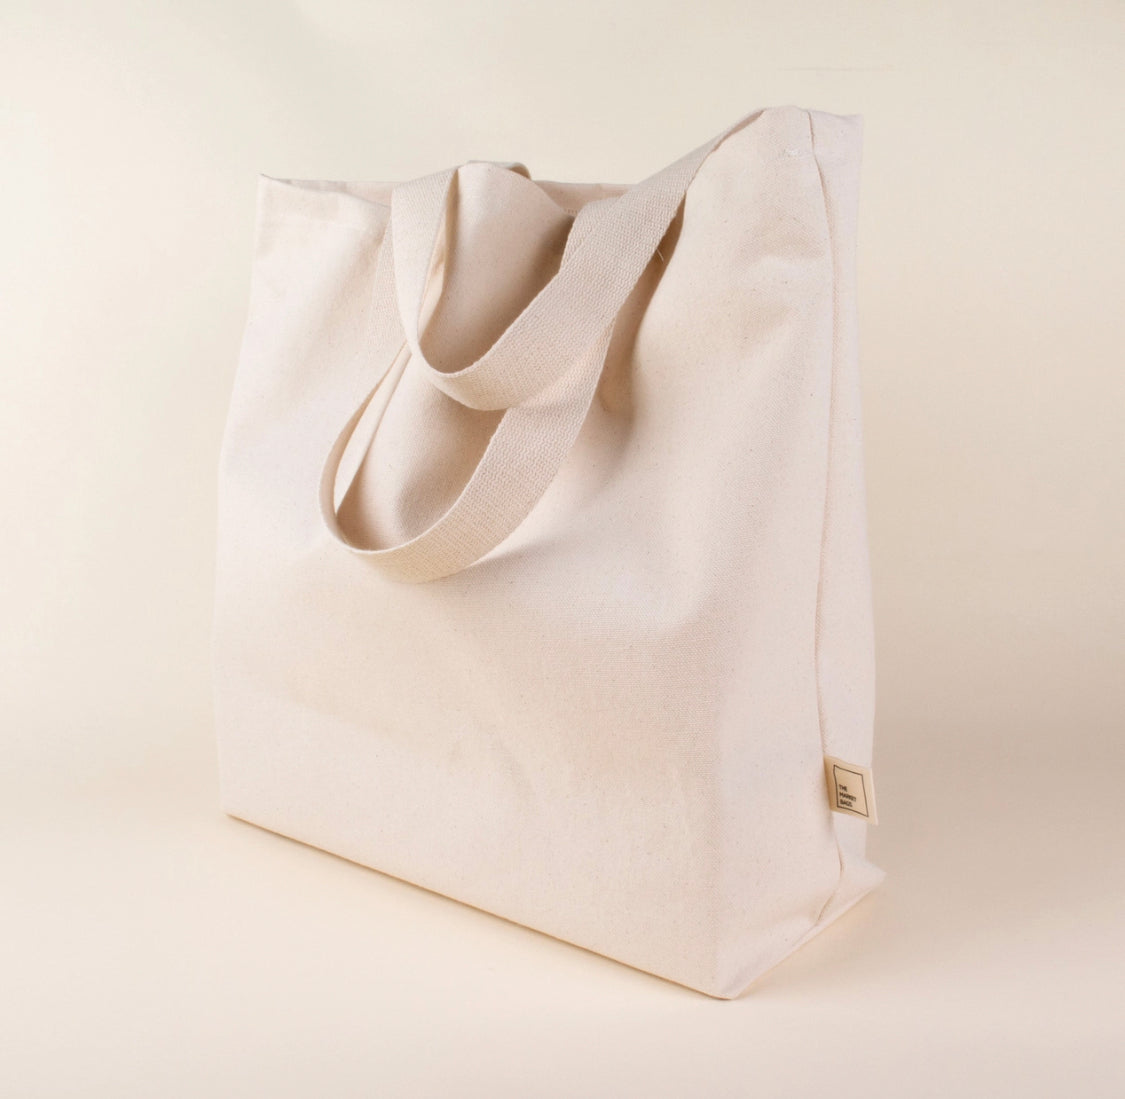 Oversized Tote | Recycled Cotton Canvas